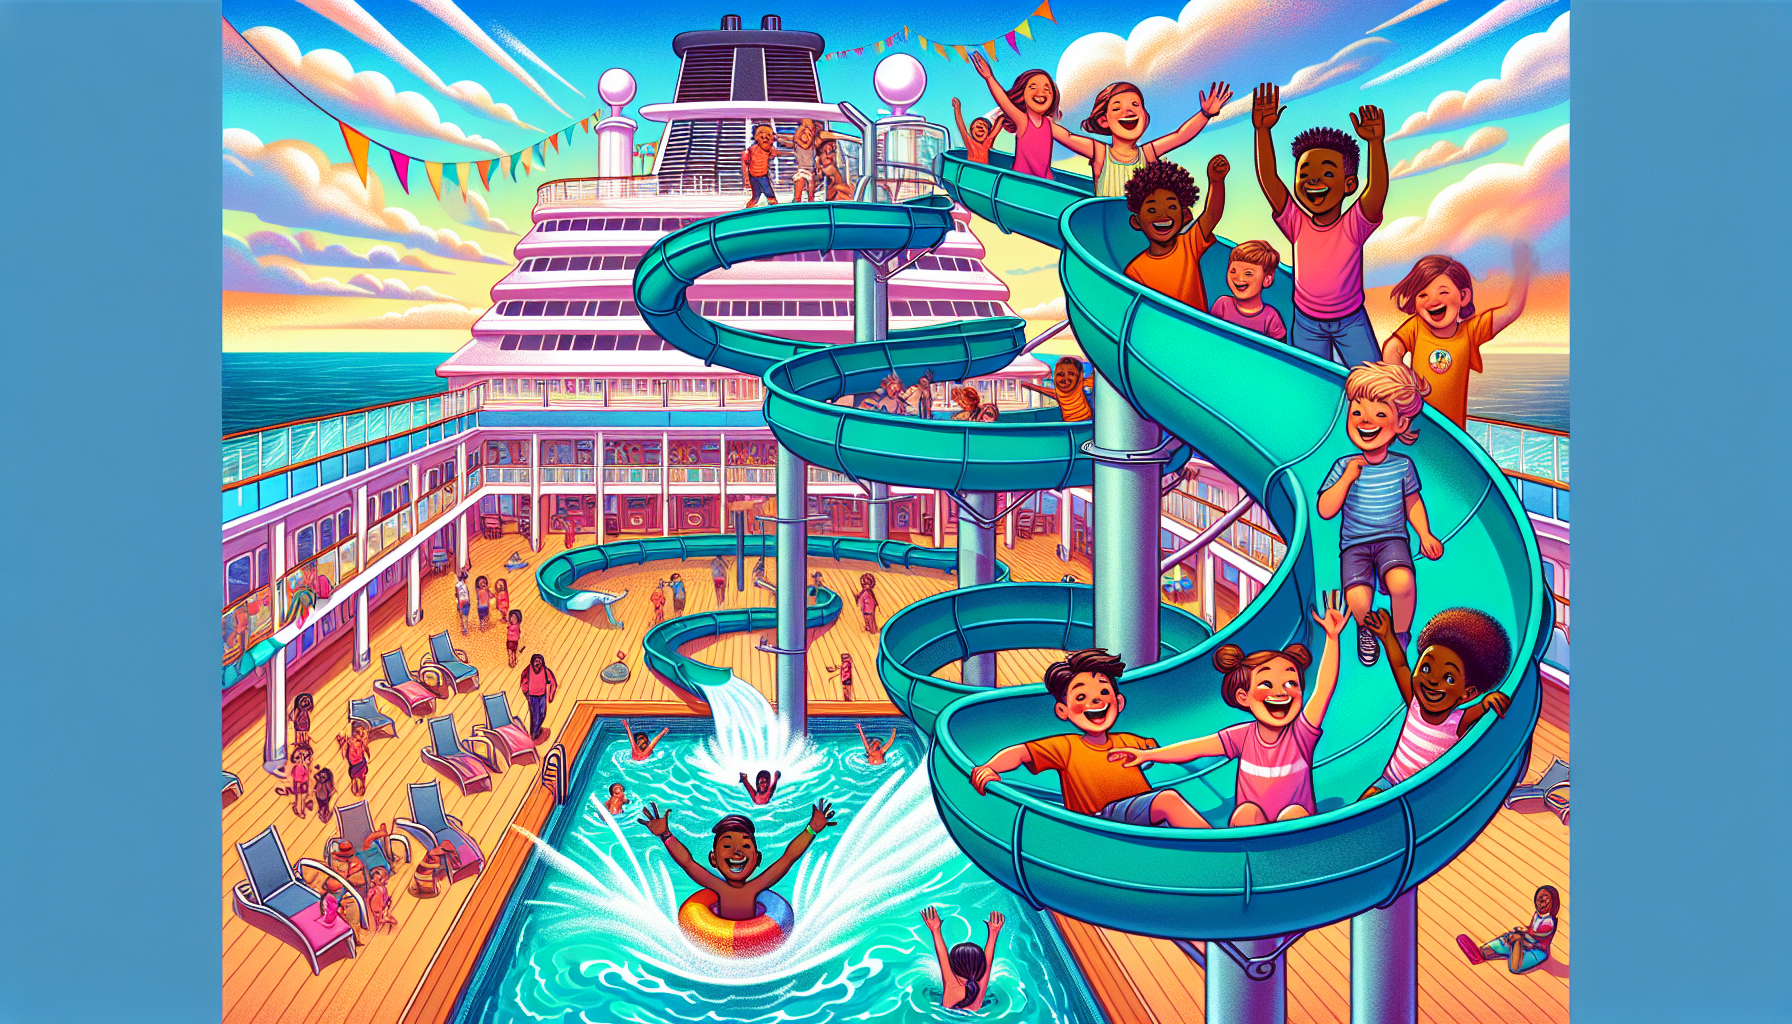 discover a world of fun and adventure for kids on a cruise ship. from thrilling water slides to exciting kids' clubs and engaging activities, there's something for every young explorer.